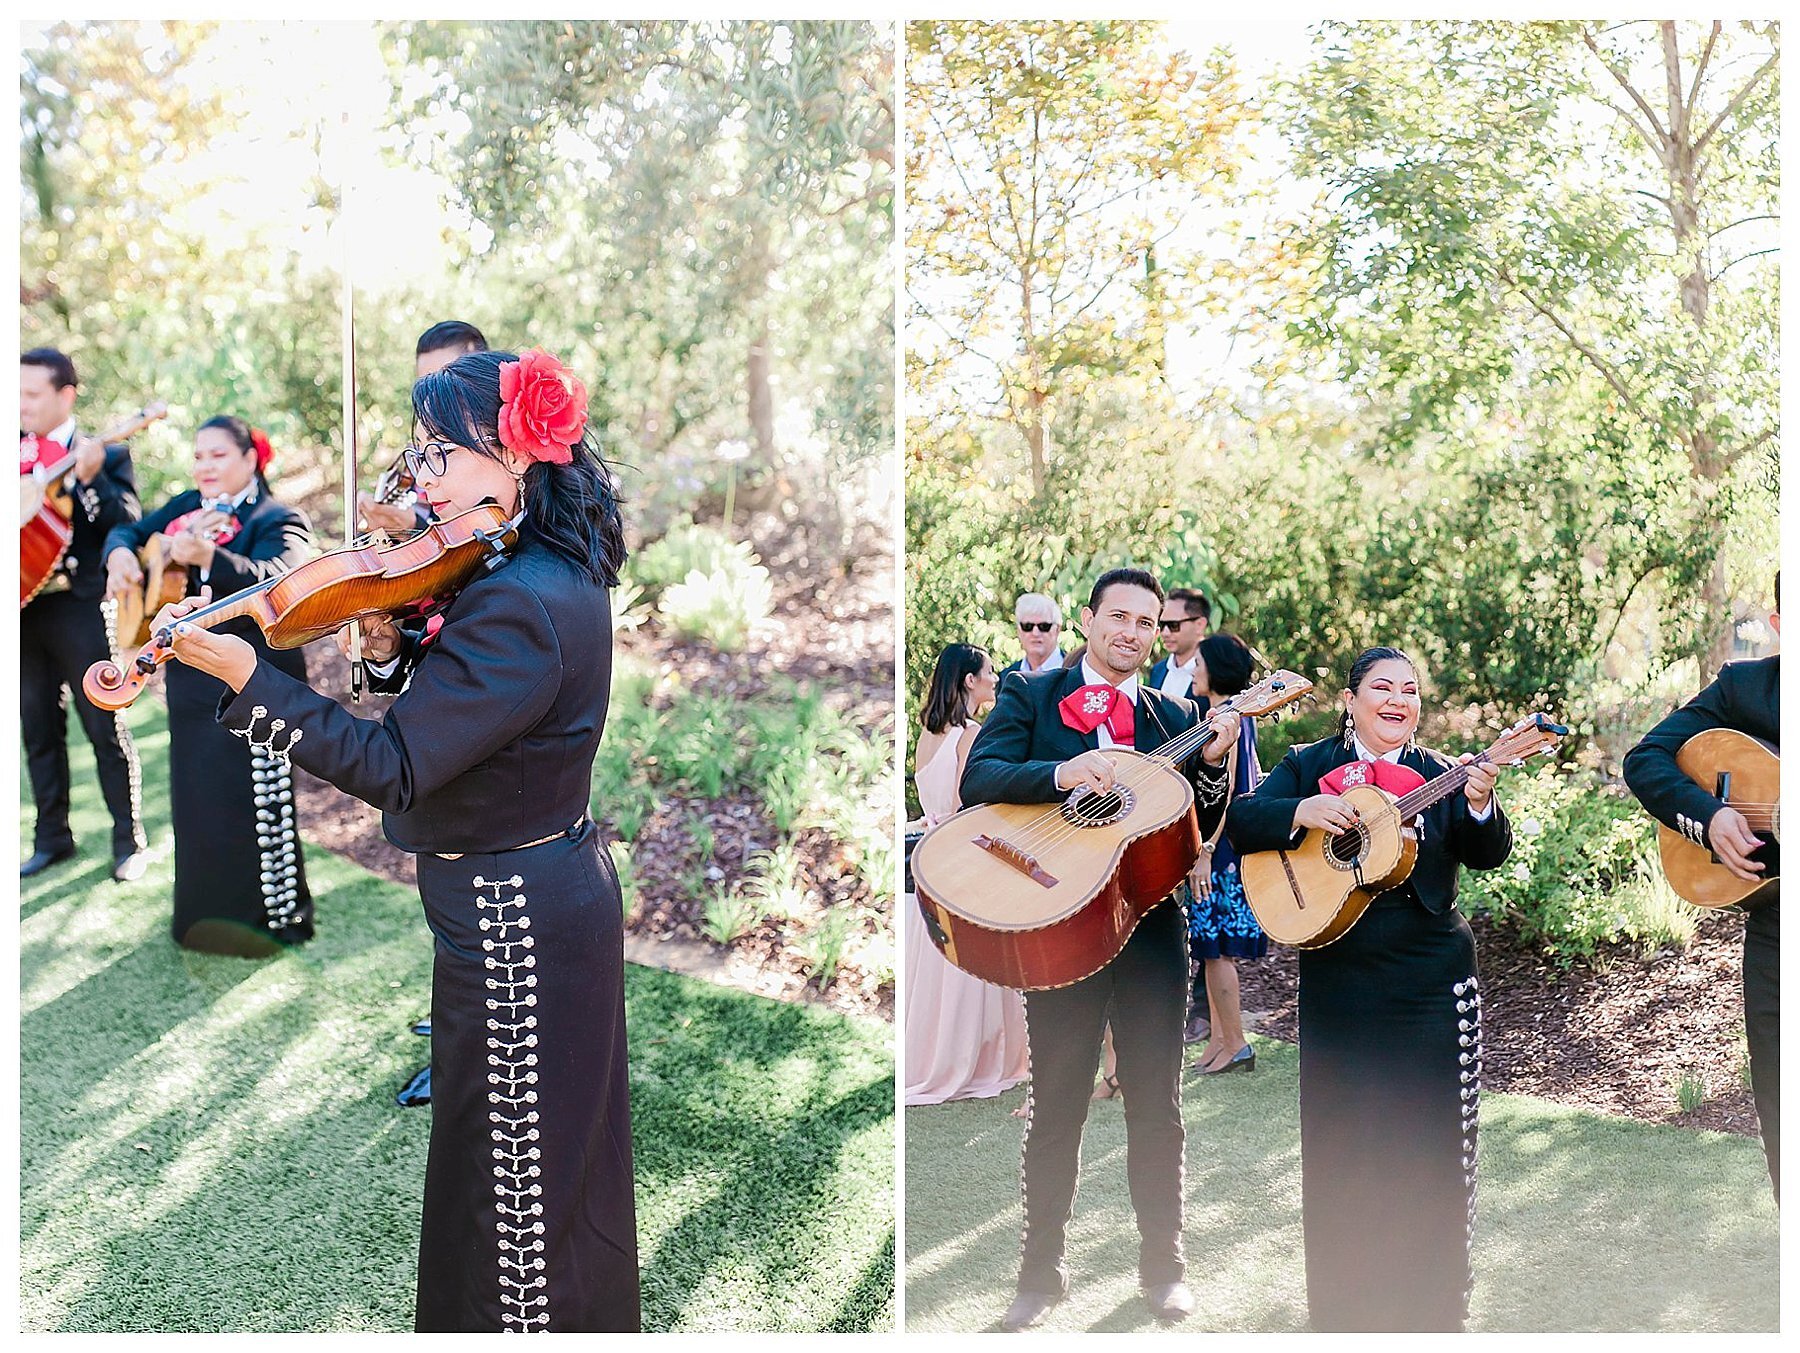  mariachi band playing instruments on the garden  